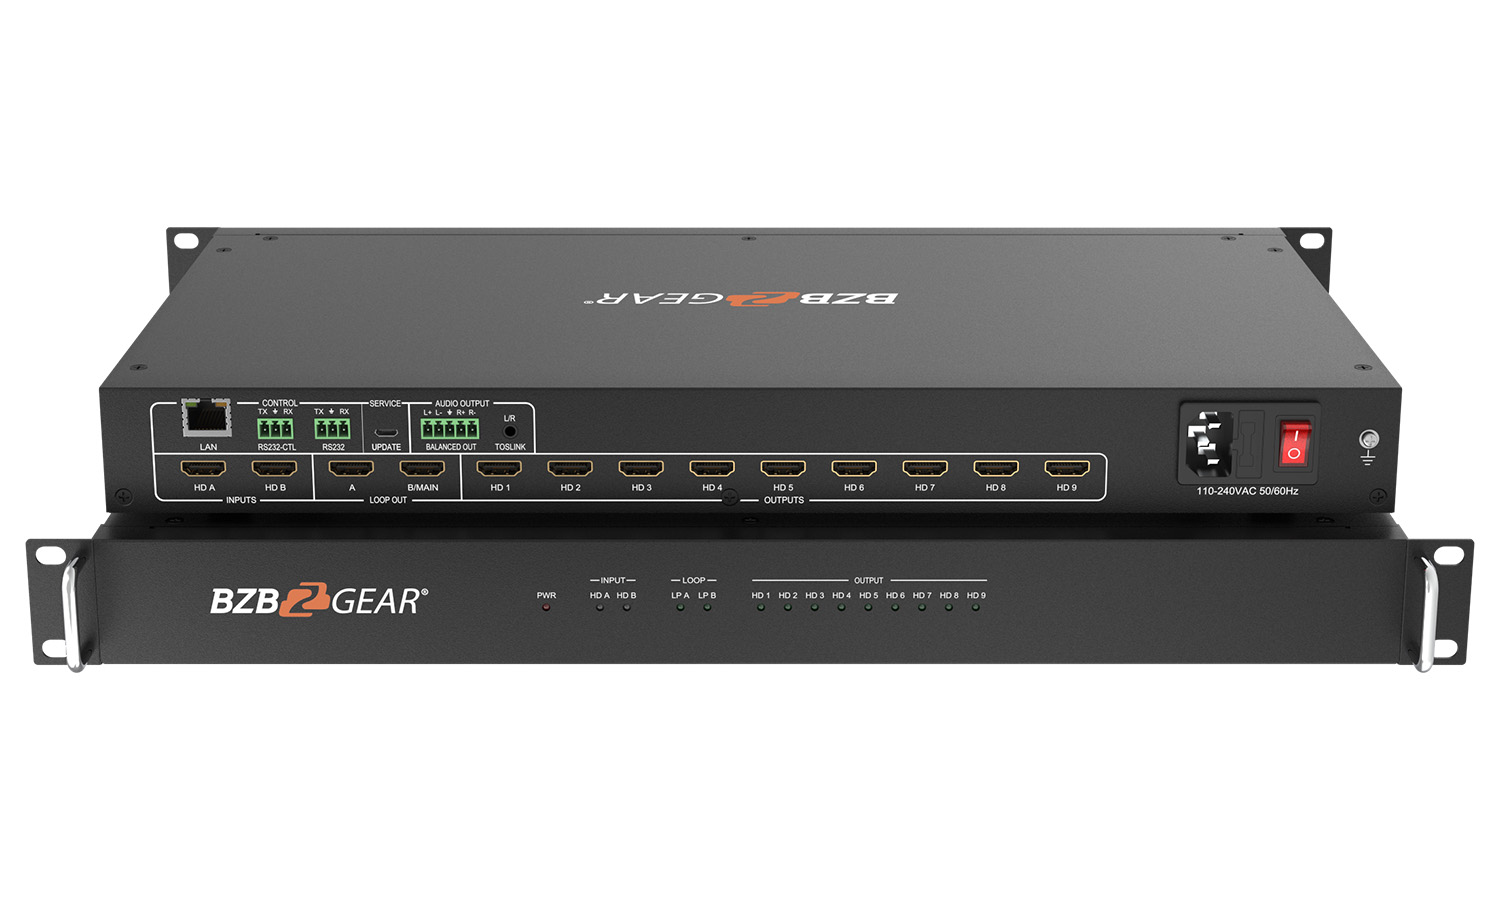 BG-UHD-VW29 3X3 4K 18Gbps UHD HDMI 2.0 Video Wall Processor/Controller with Audio and IP/RS232 Control by BZBGEAR